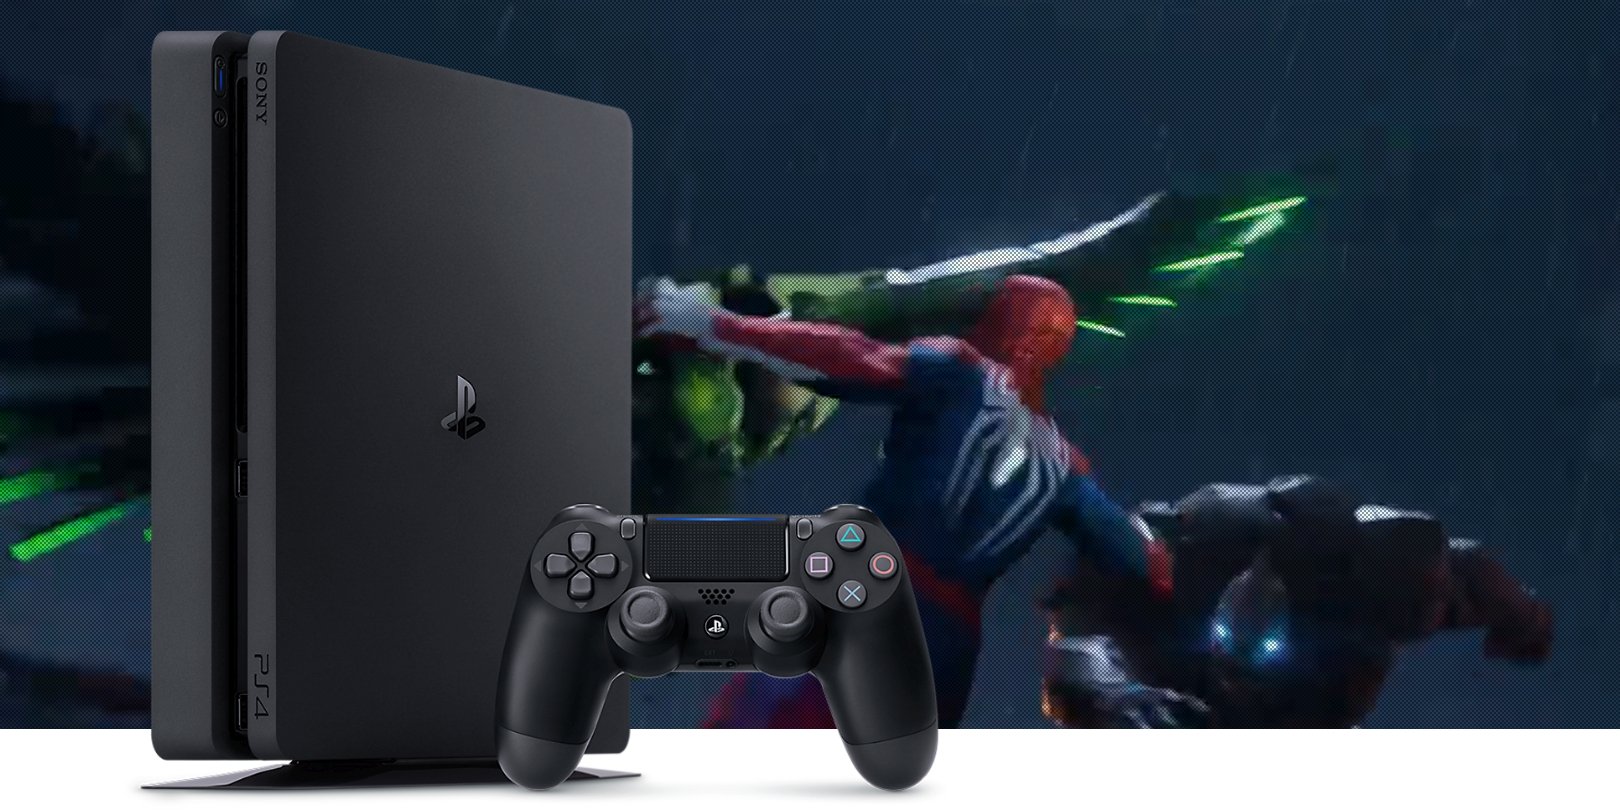 PlayStation Celebrates Over 100 Million Active Users And Over 106 Million Units Sold